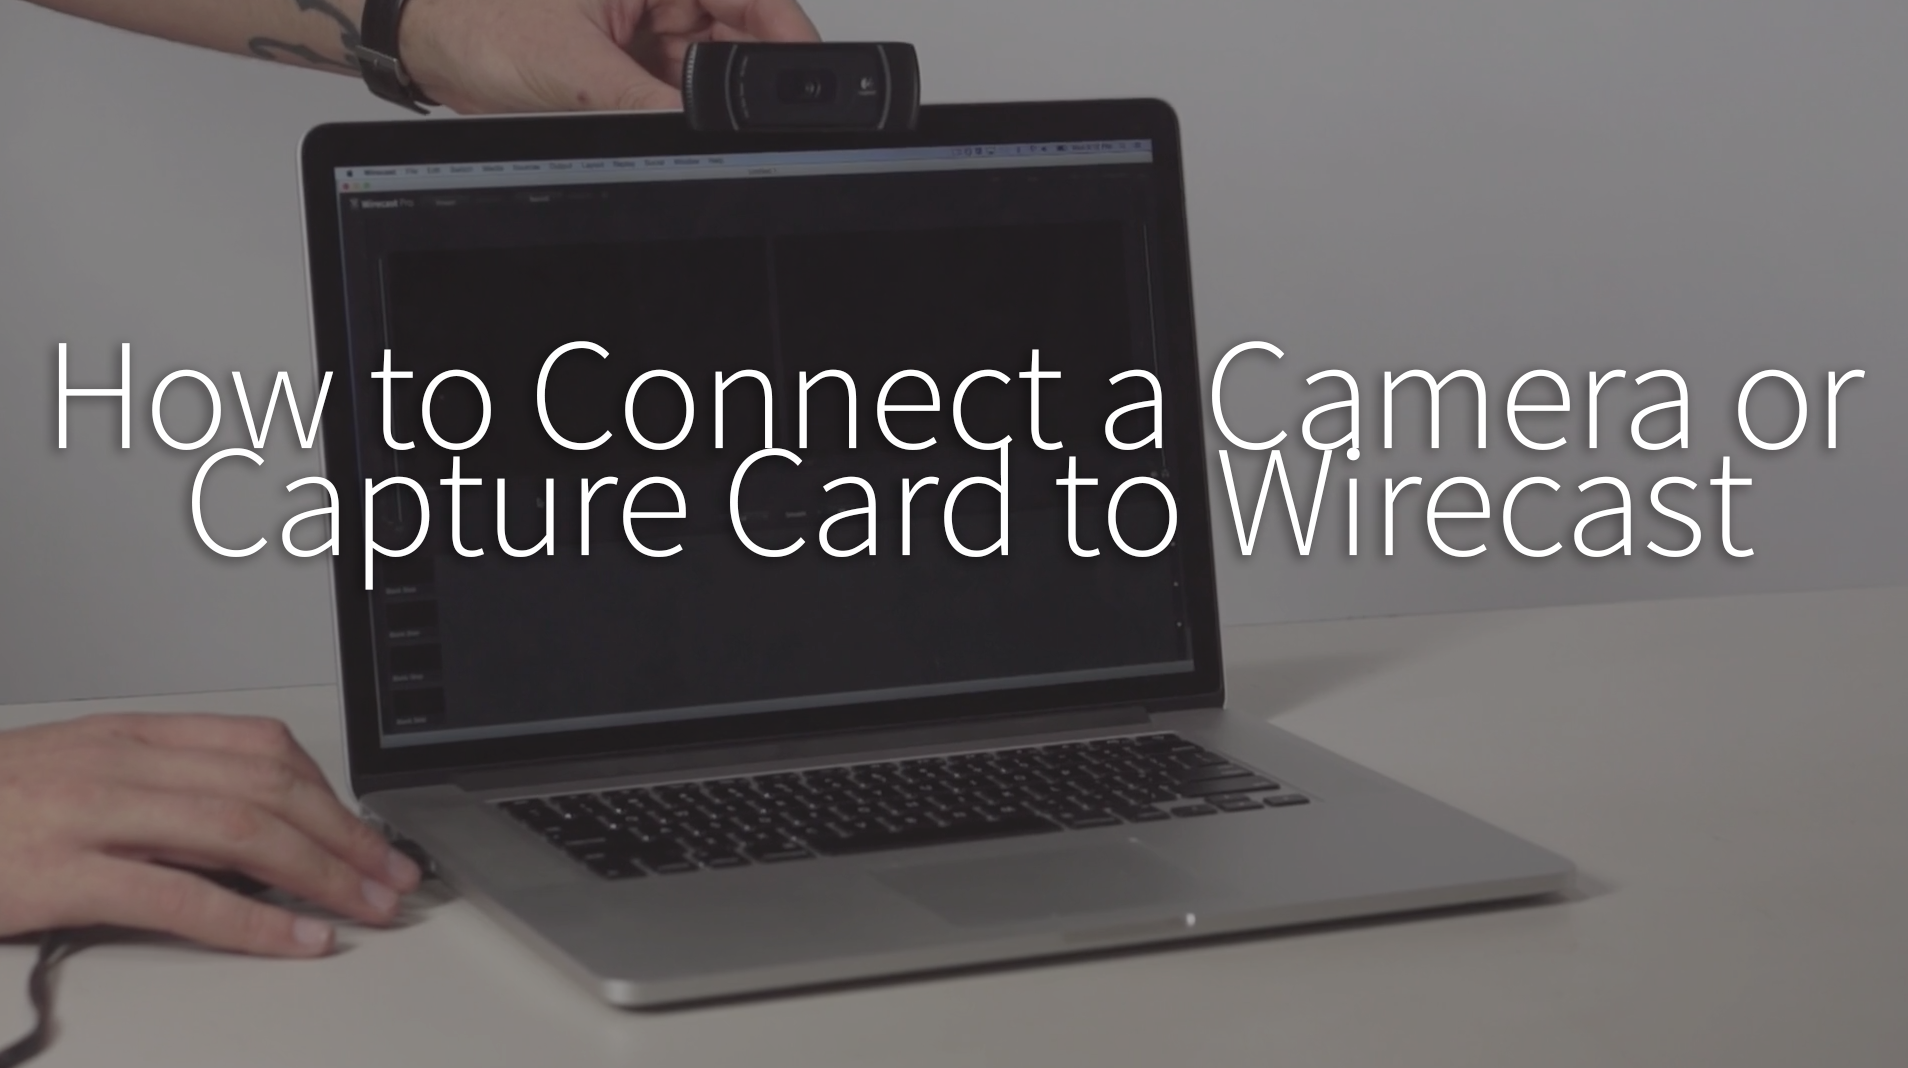 How to Connect a Camera or Capture Card to Wirecast